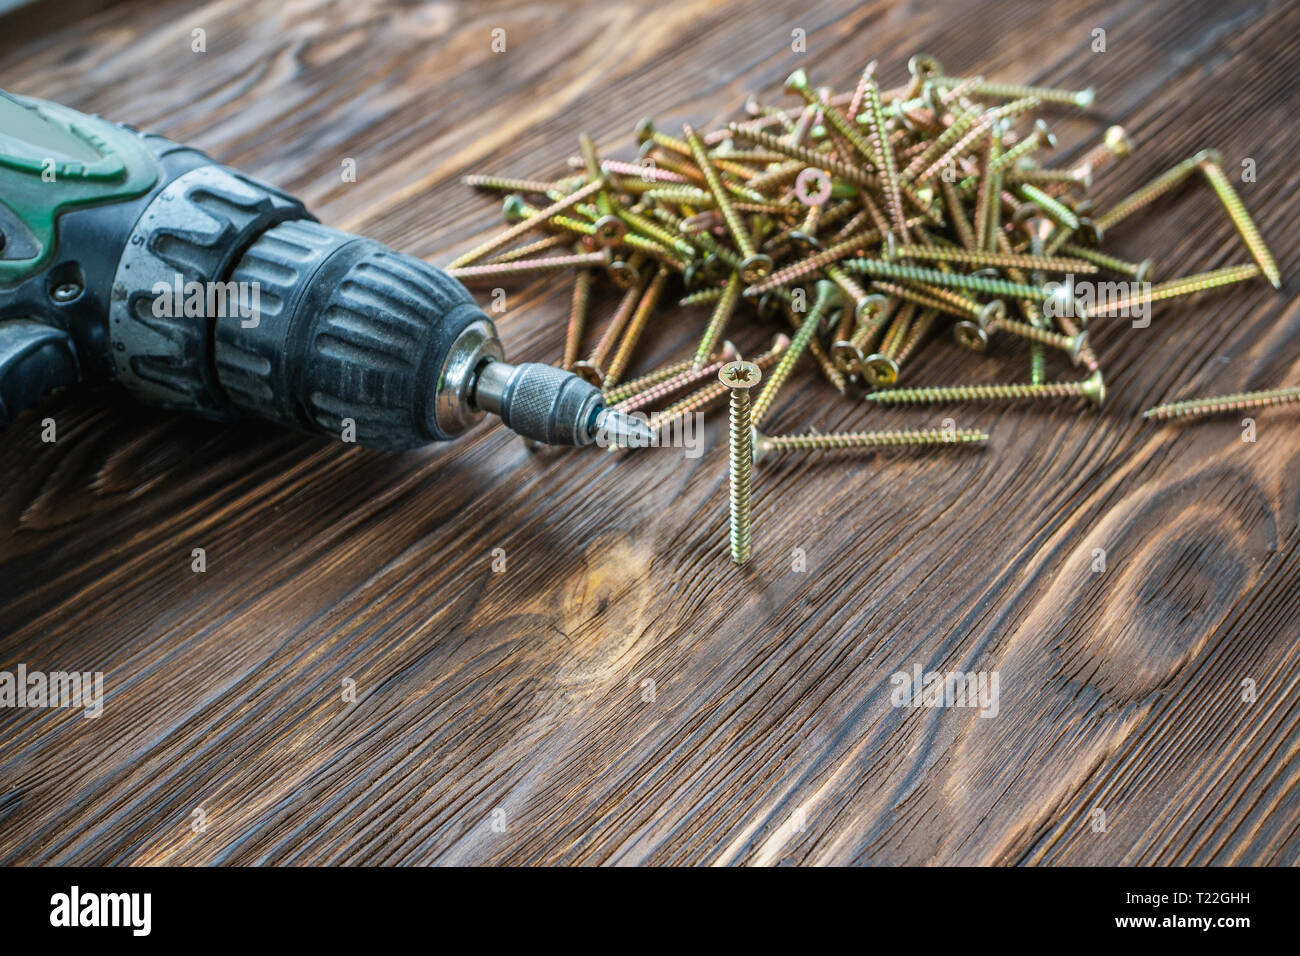 https://c8.alamy.com/comp/T22GHH/drill-screws-and-dowels-on-wood-background-copy-space-T22GHH.jpg